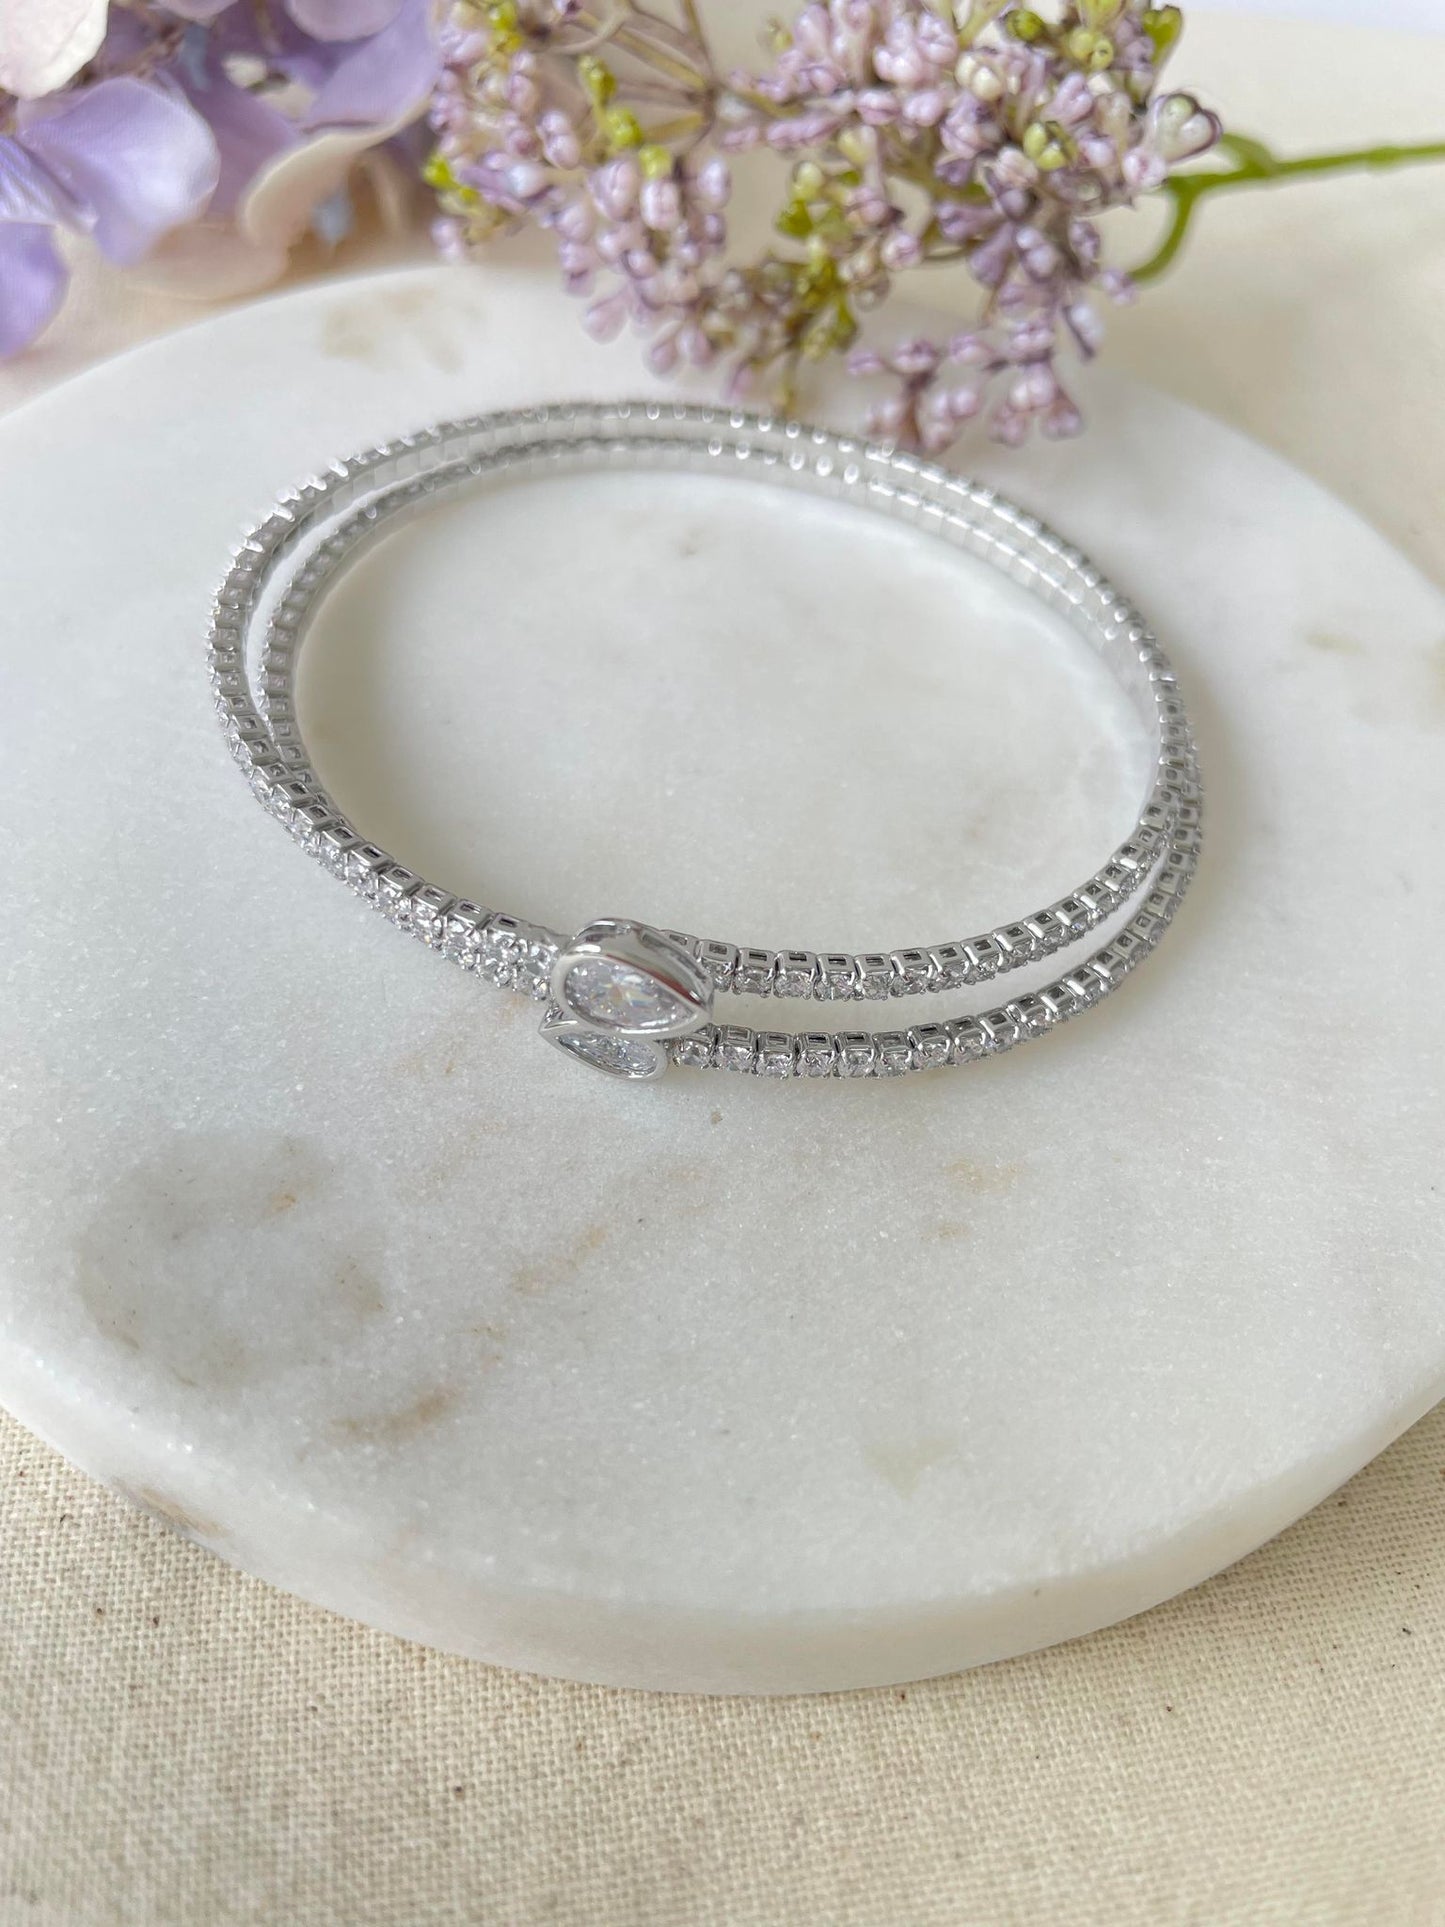 Tear shaped cubic zironia spiral silver bangle